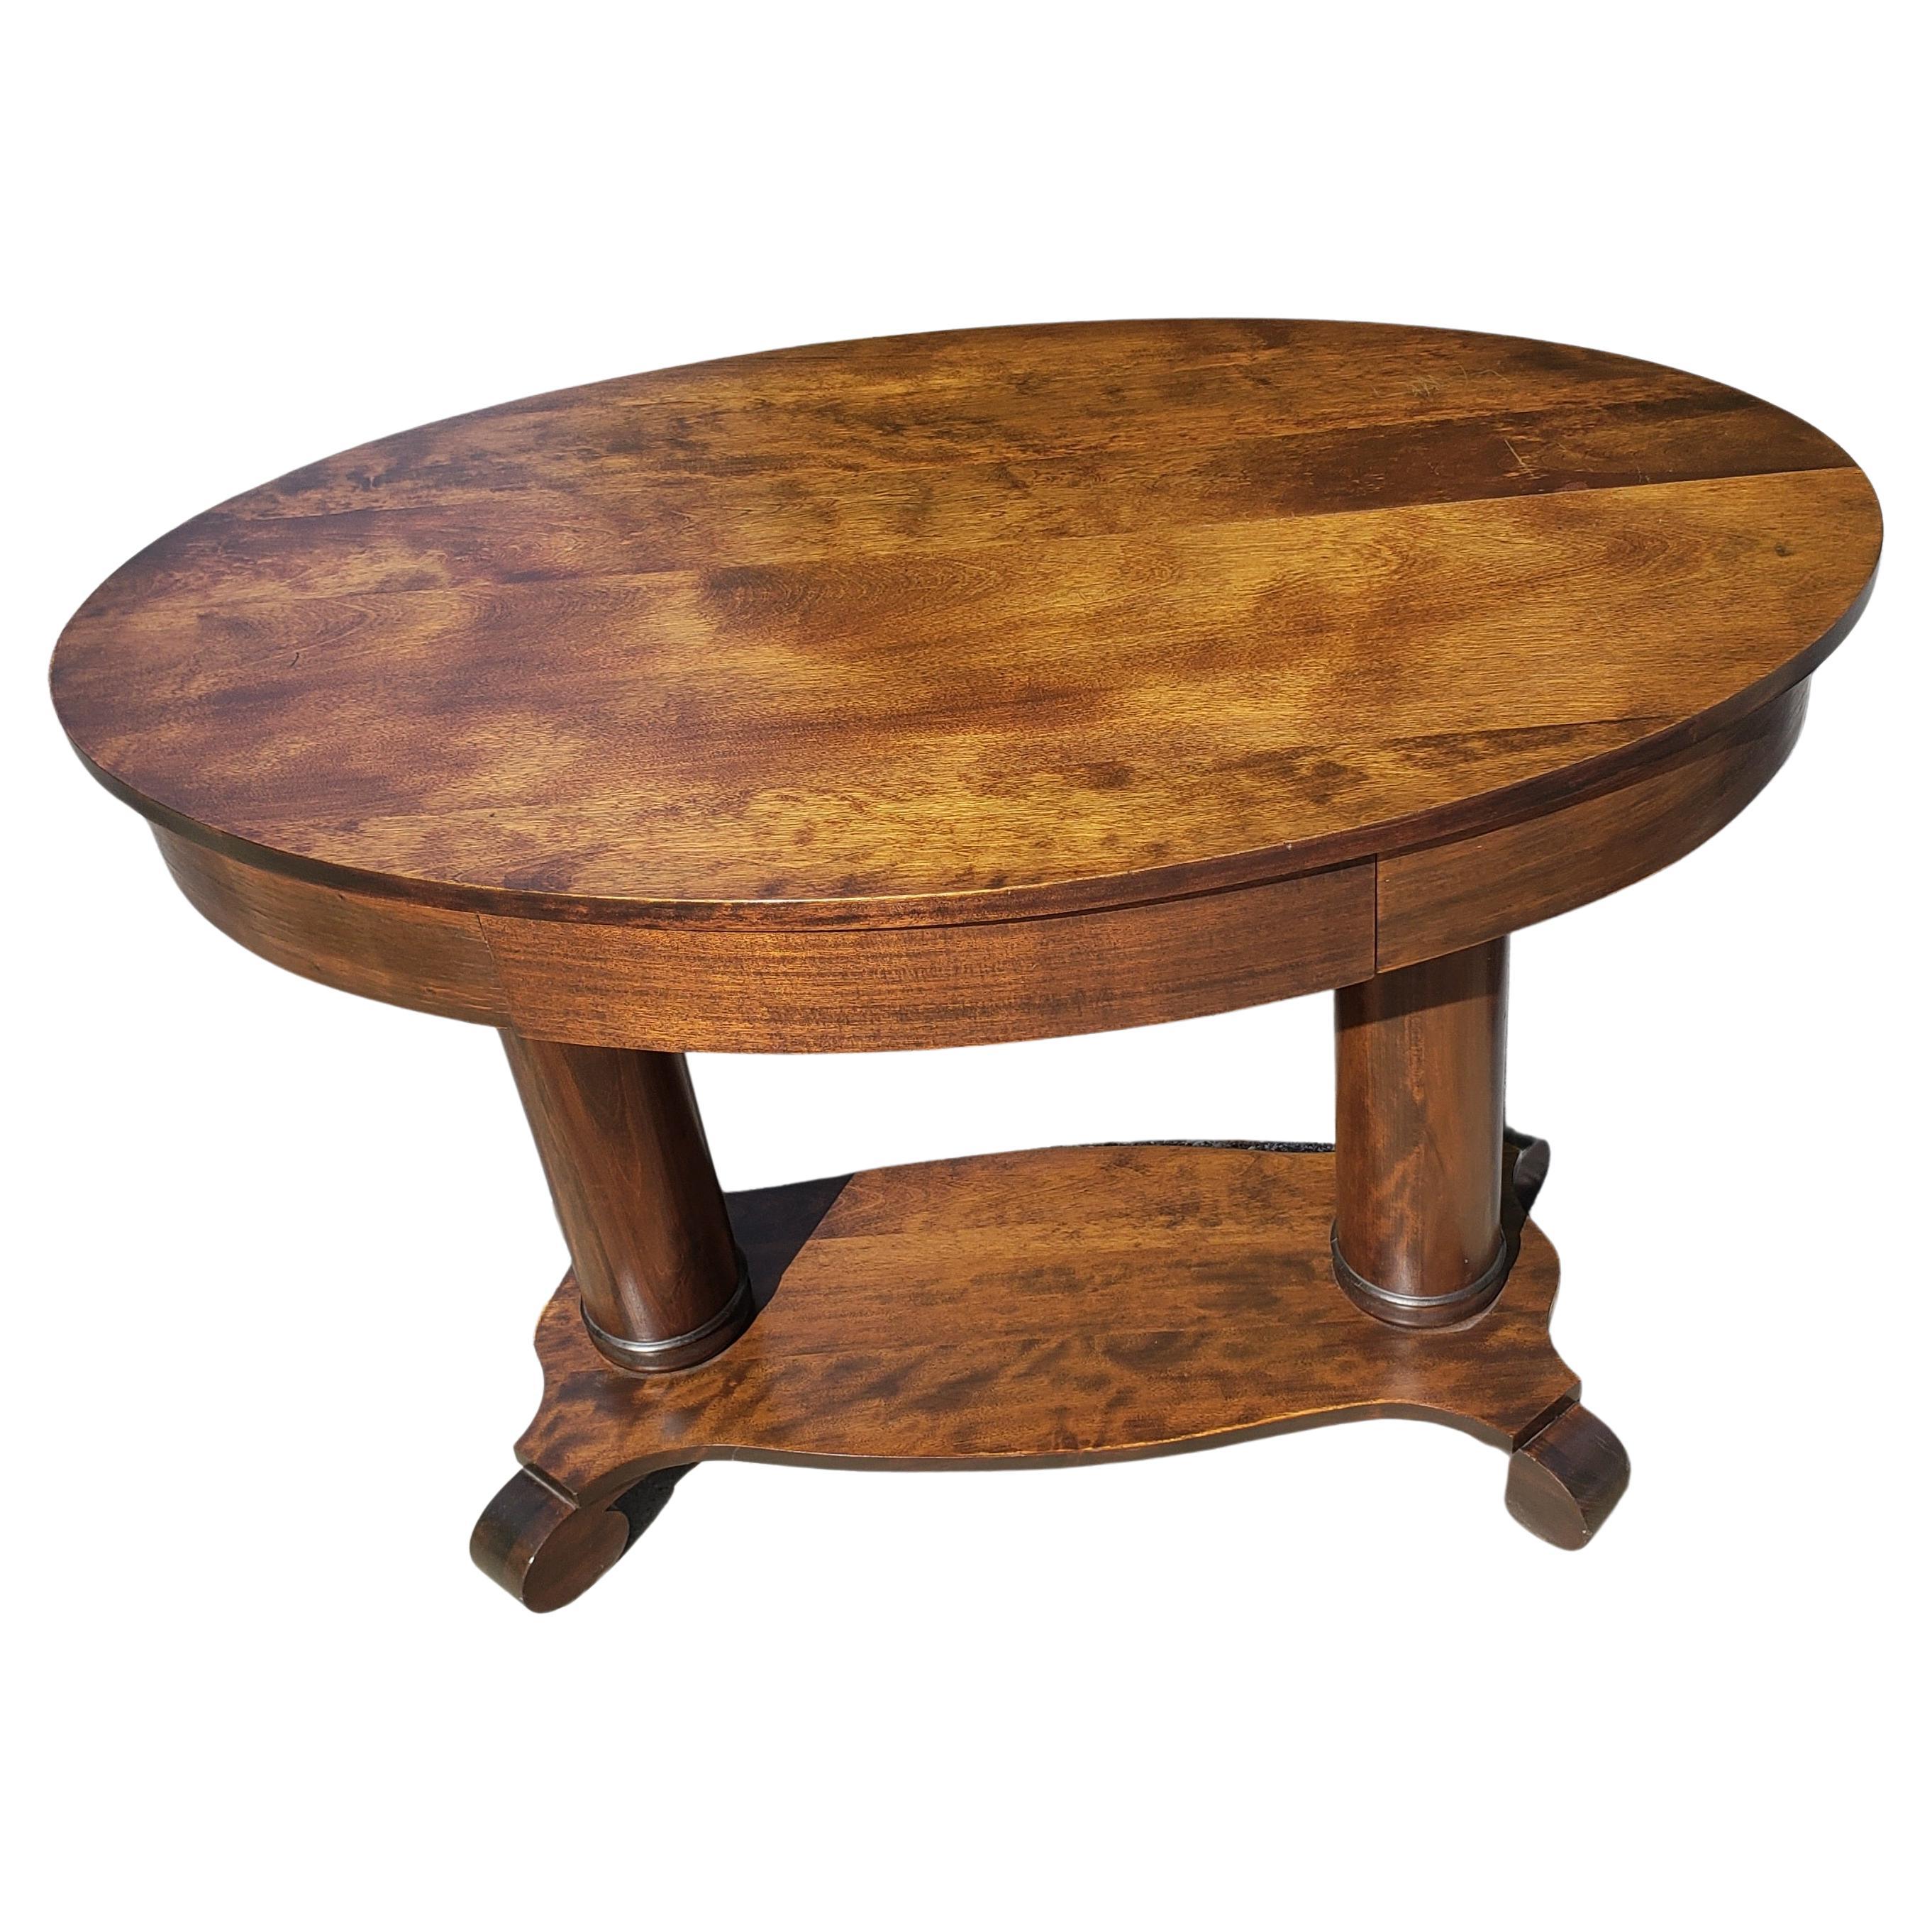 Absolutely gorgeous American Empire style oval library table with drawer in 
Stained Oak. Measures 42